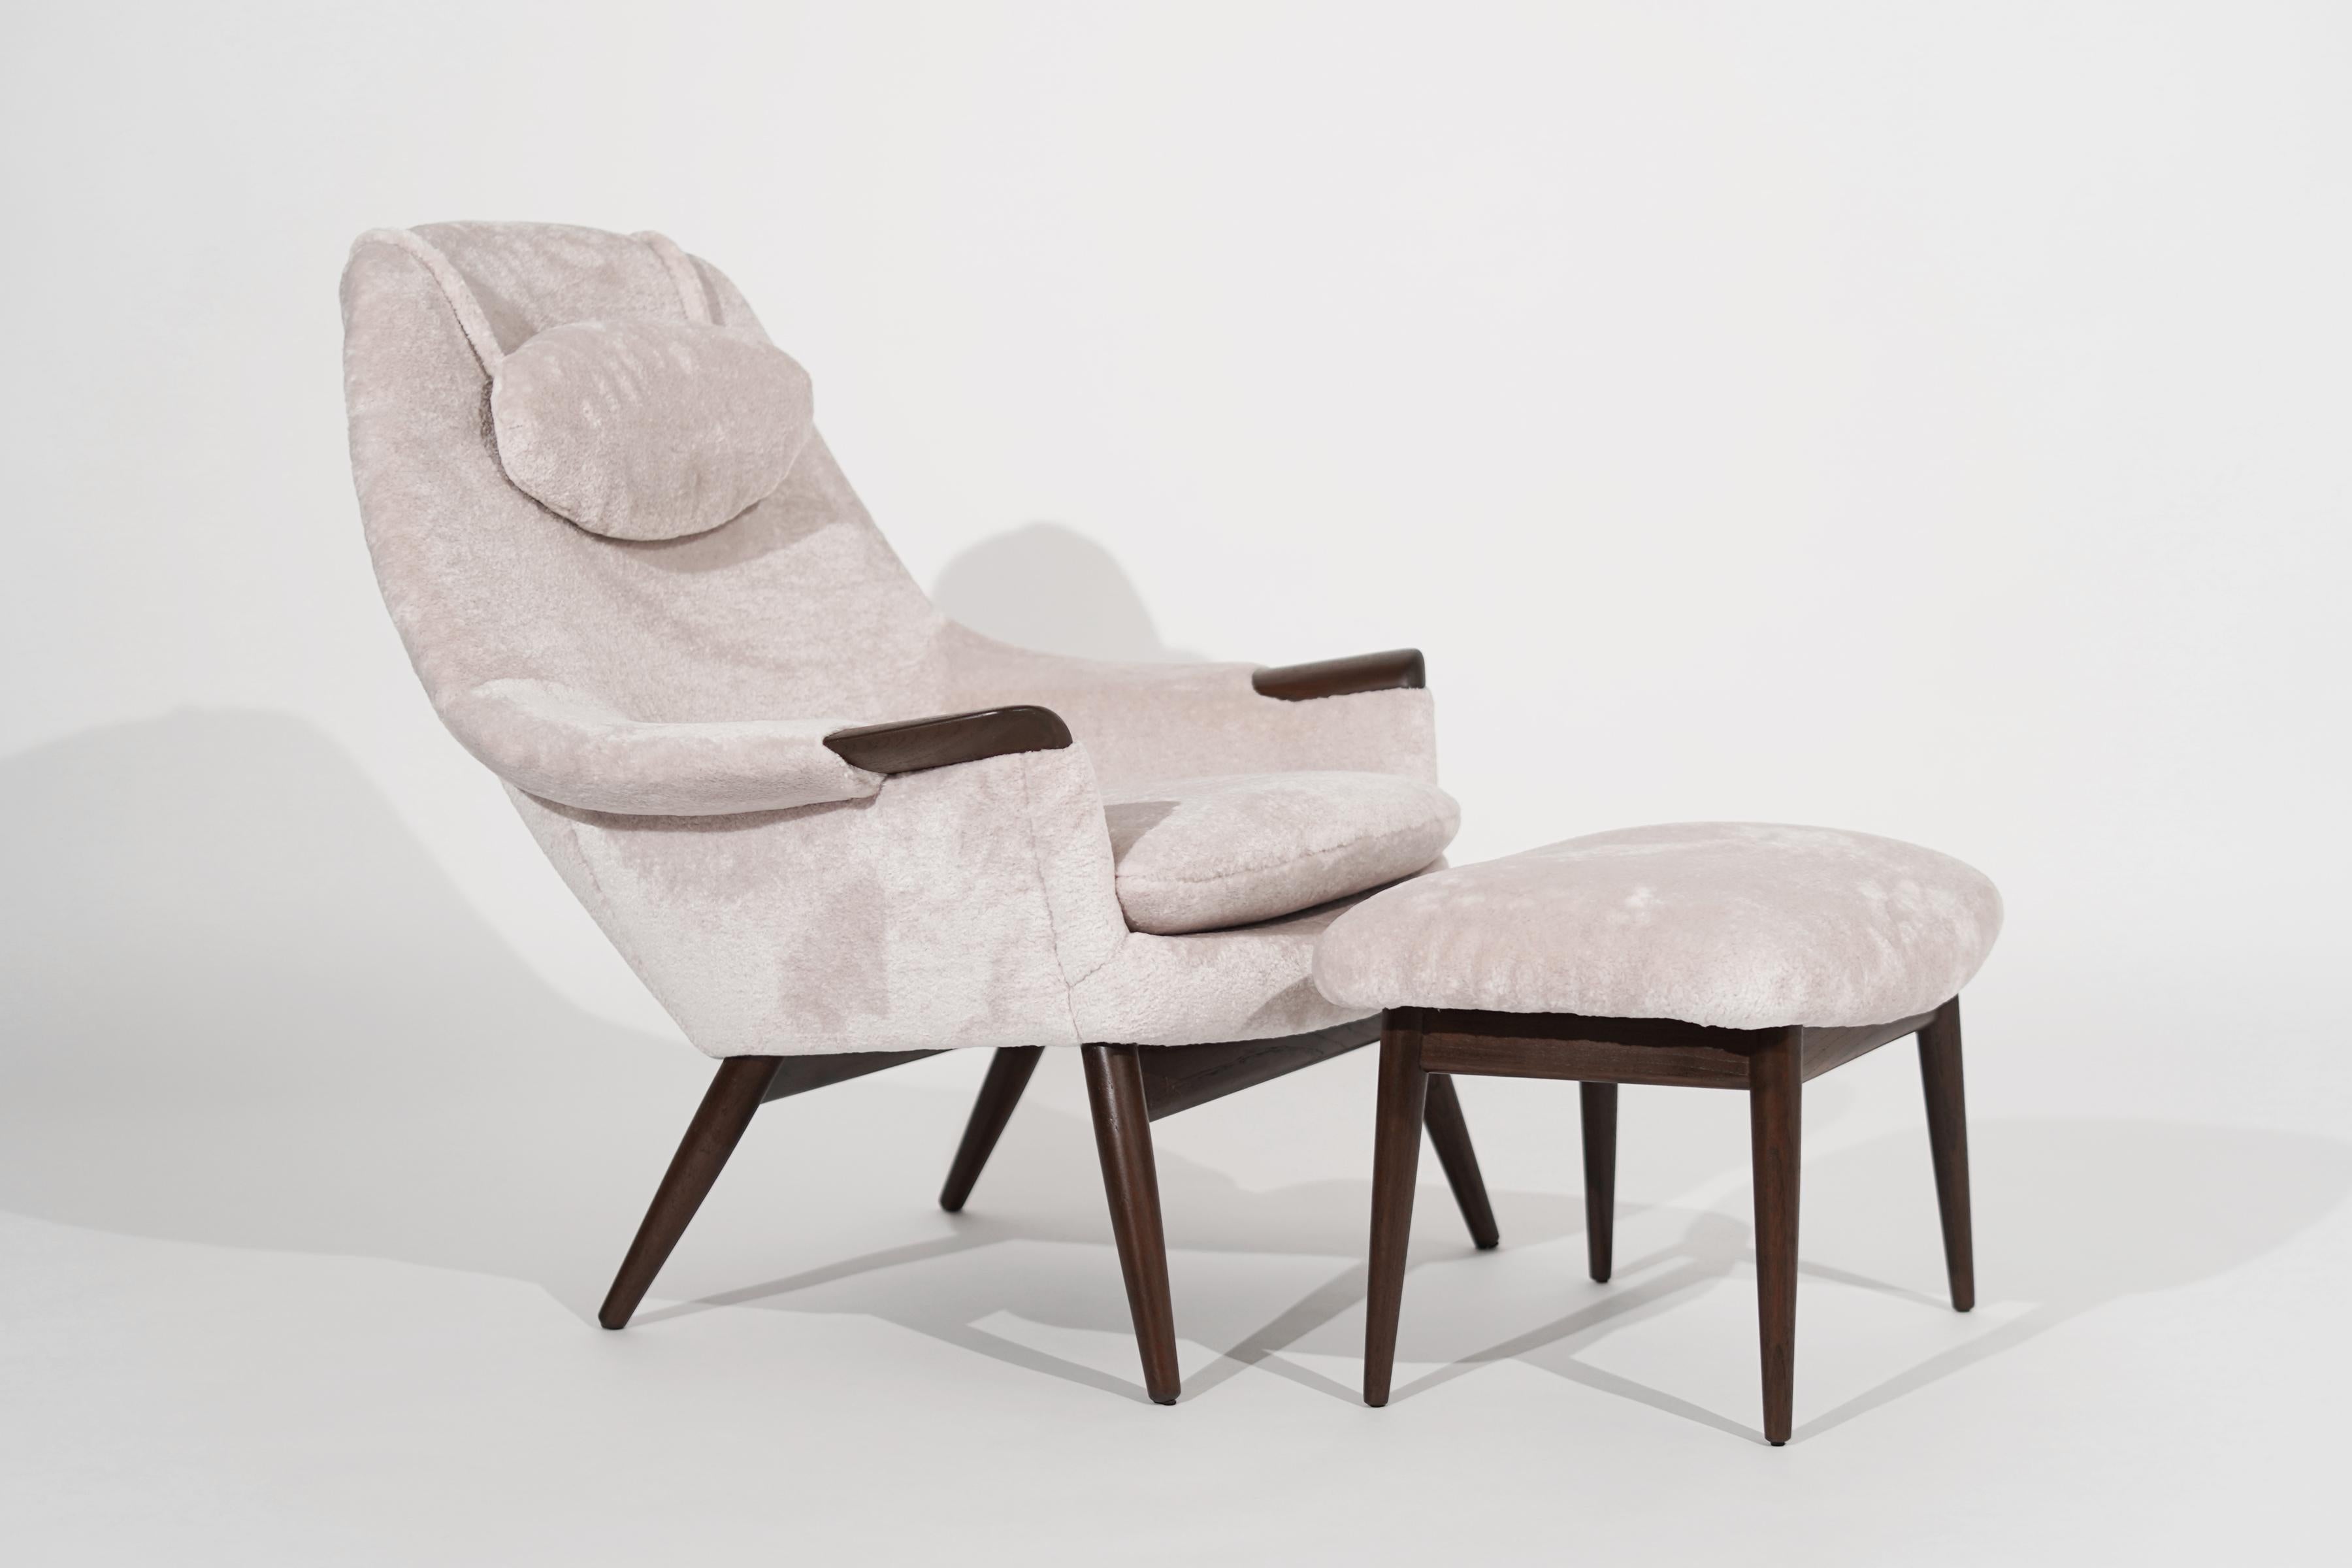 An exquisite lounge chair and footstool, featuring subtle curves, teak details, and super soft cotton/wool upholstery. Designed Gerhard Berg, Denmark, circa 1950-1959. Completely restored.

